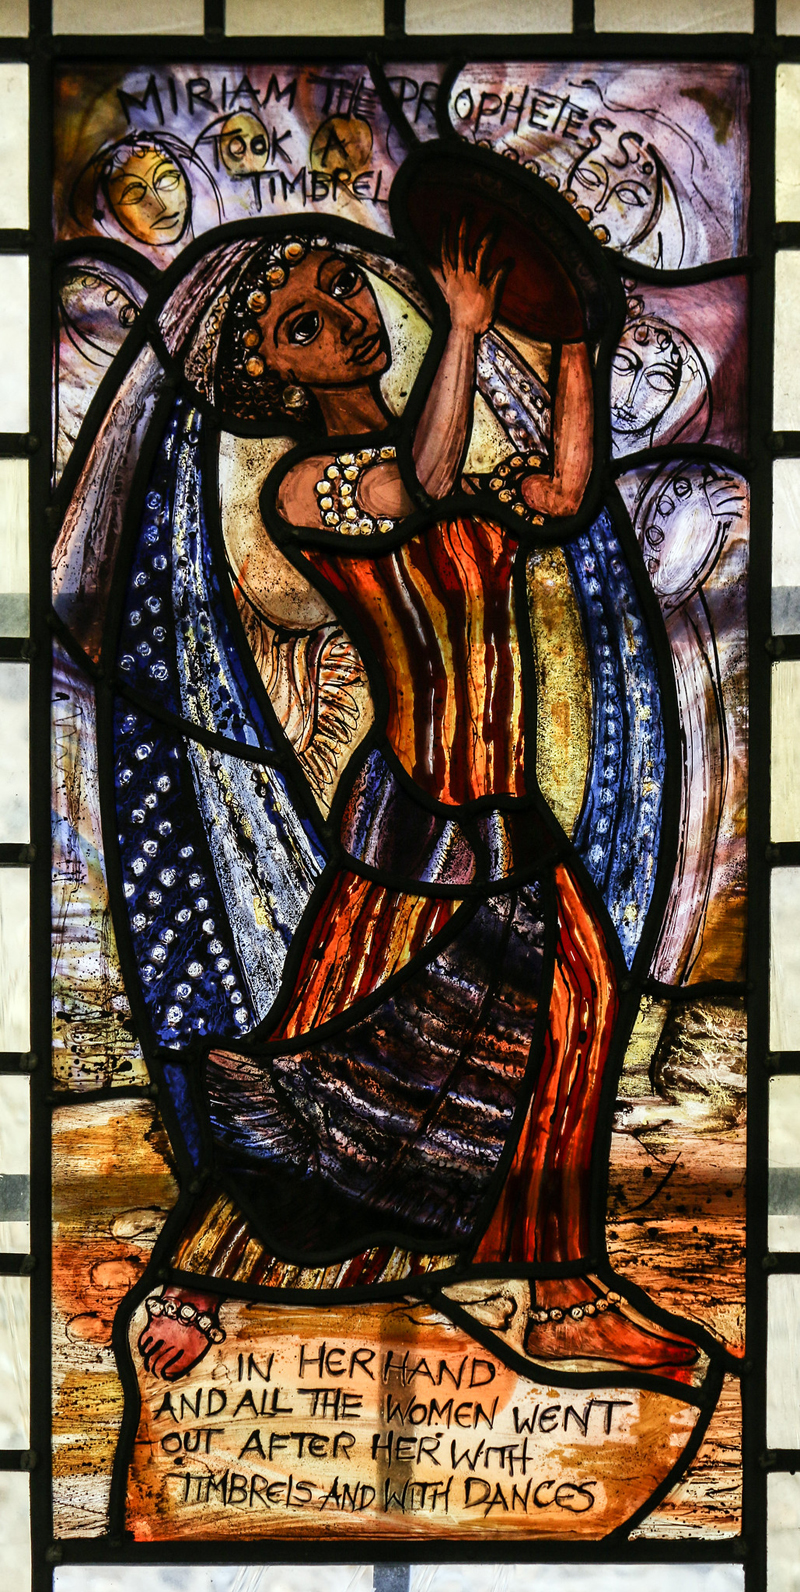 Title: Prophet Miriam [Click for larger image view]